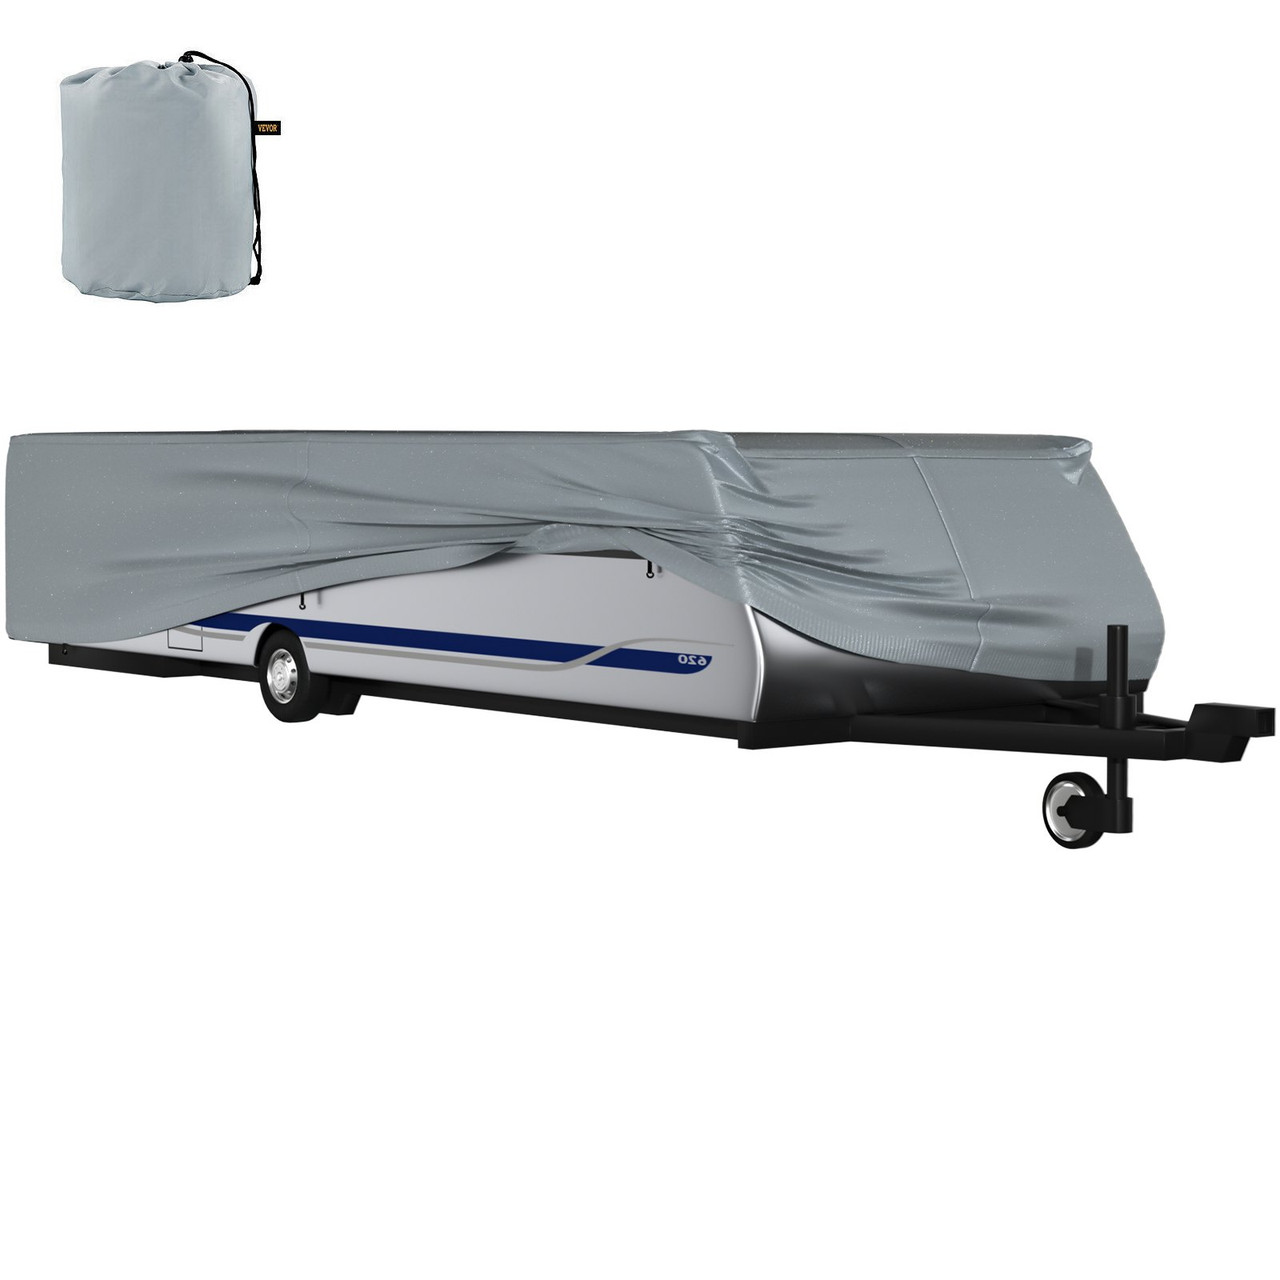 Pop Up Camper Cover Pop Up RV Cover Fit for 16-18 ft Long Trailers